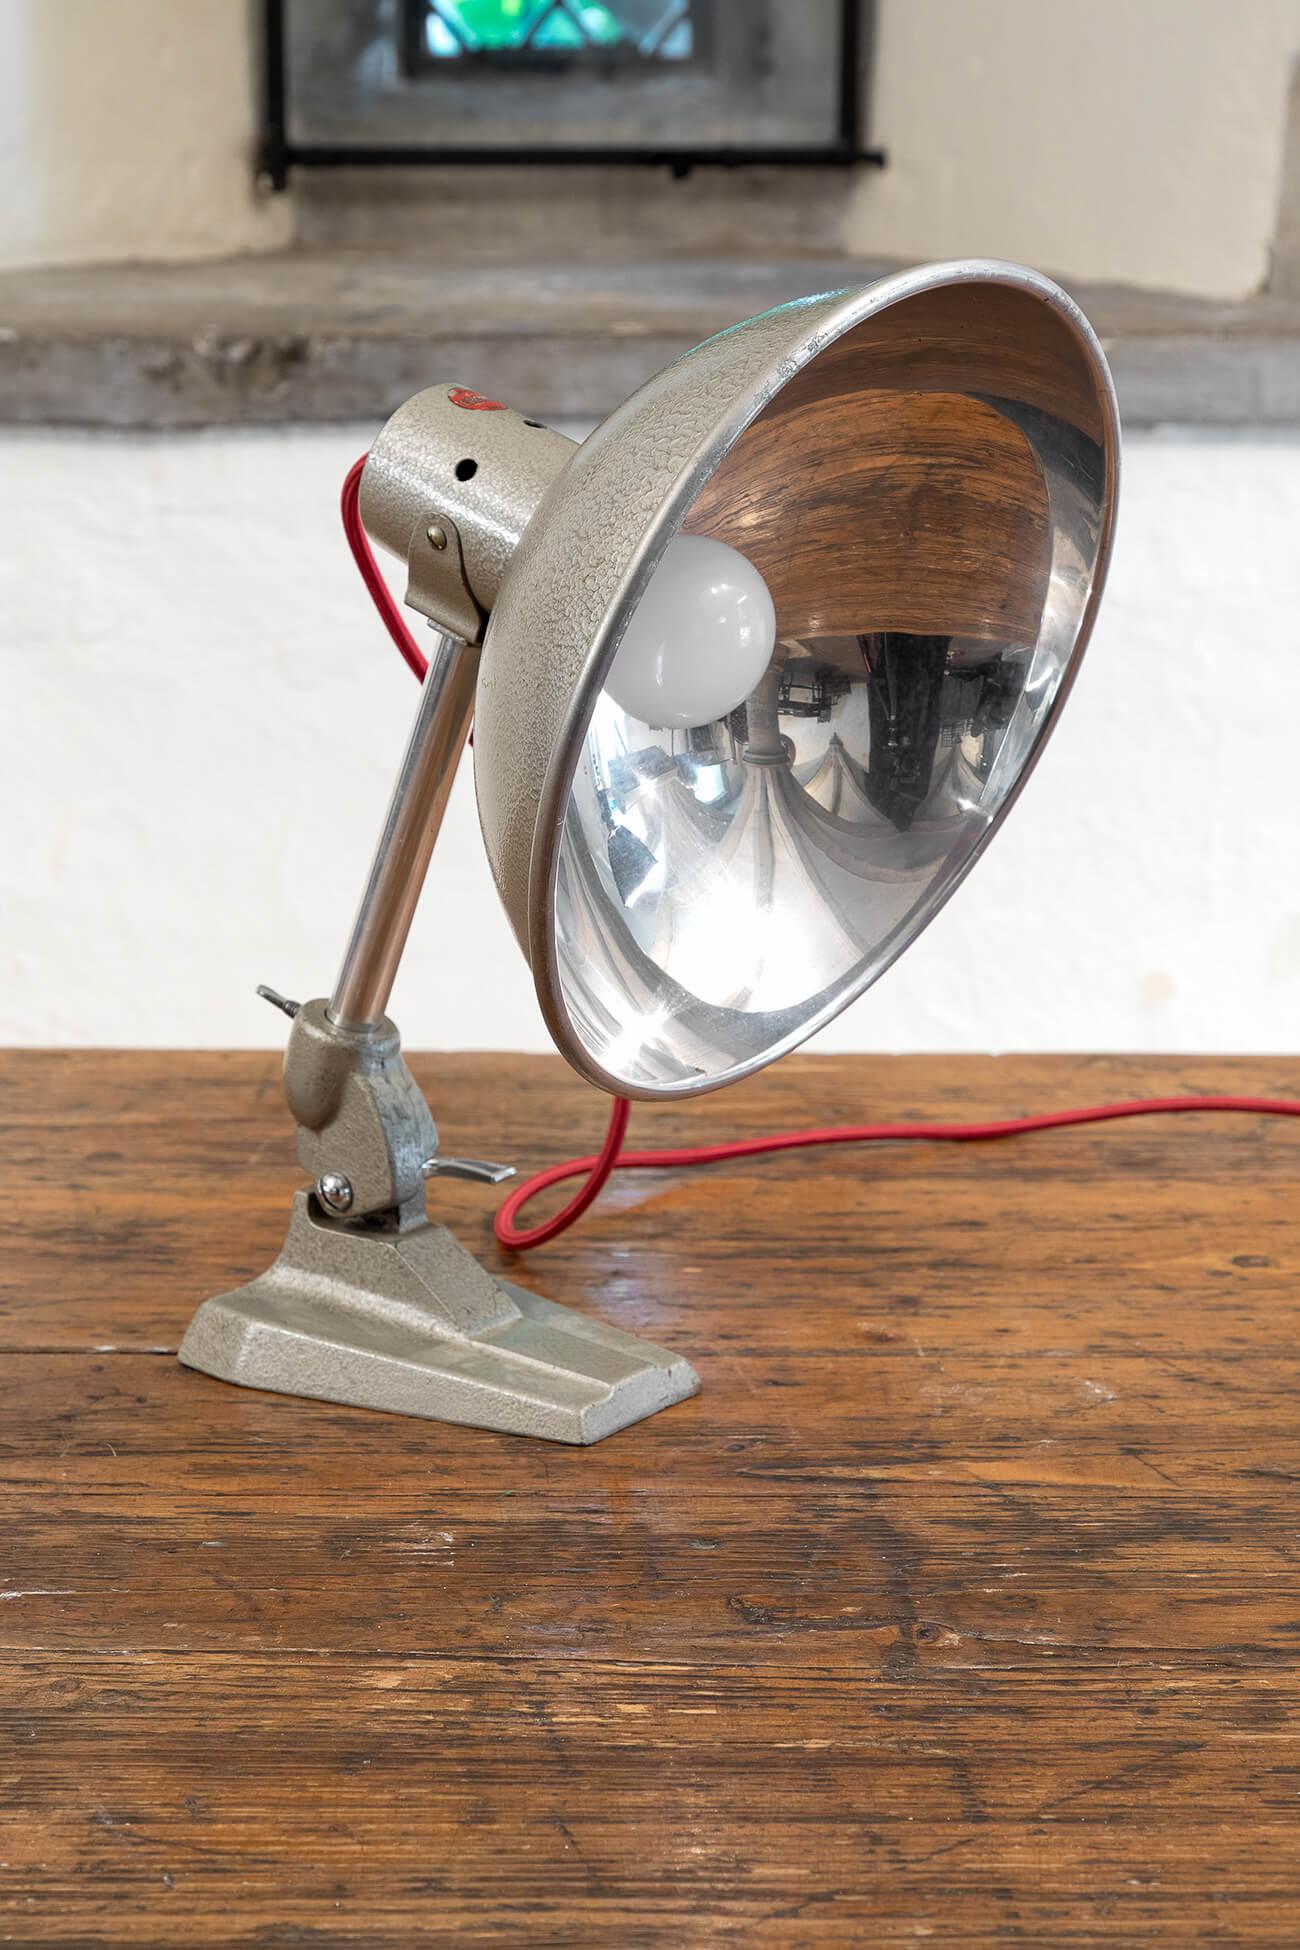 Vintage industrial desk lamp by British company Ergon. With an aluminum shade and steel base. Can be adjusted to the base of the arm.
British, 1960s. 

Additional information:
H 43 cm (H 16.9 inches)
Shade: D 27 cm (D 10.6 inches
Base: W 15 cm